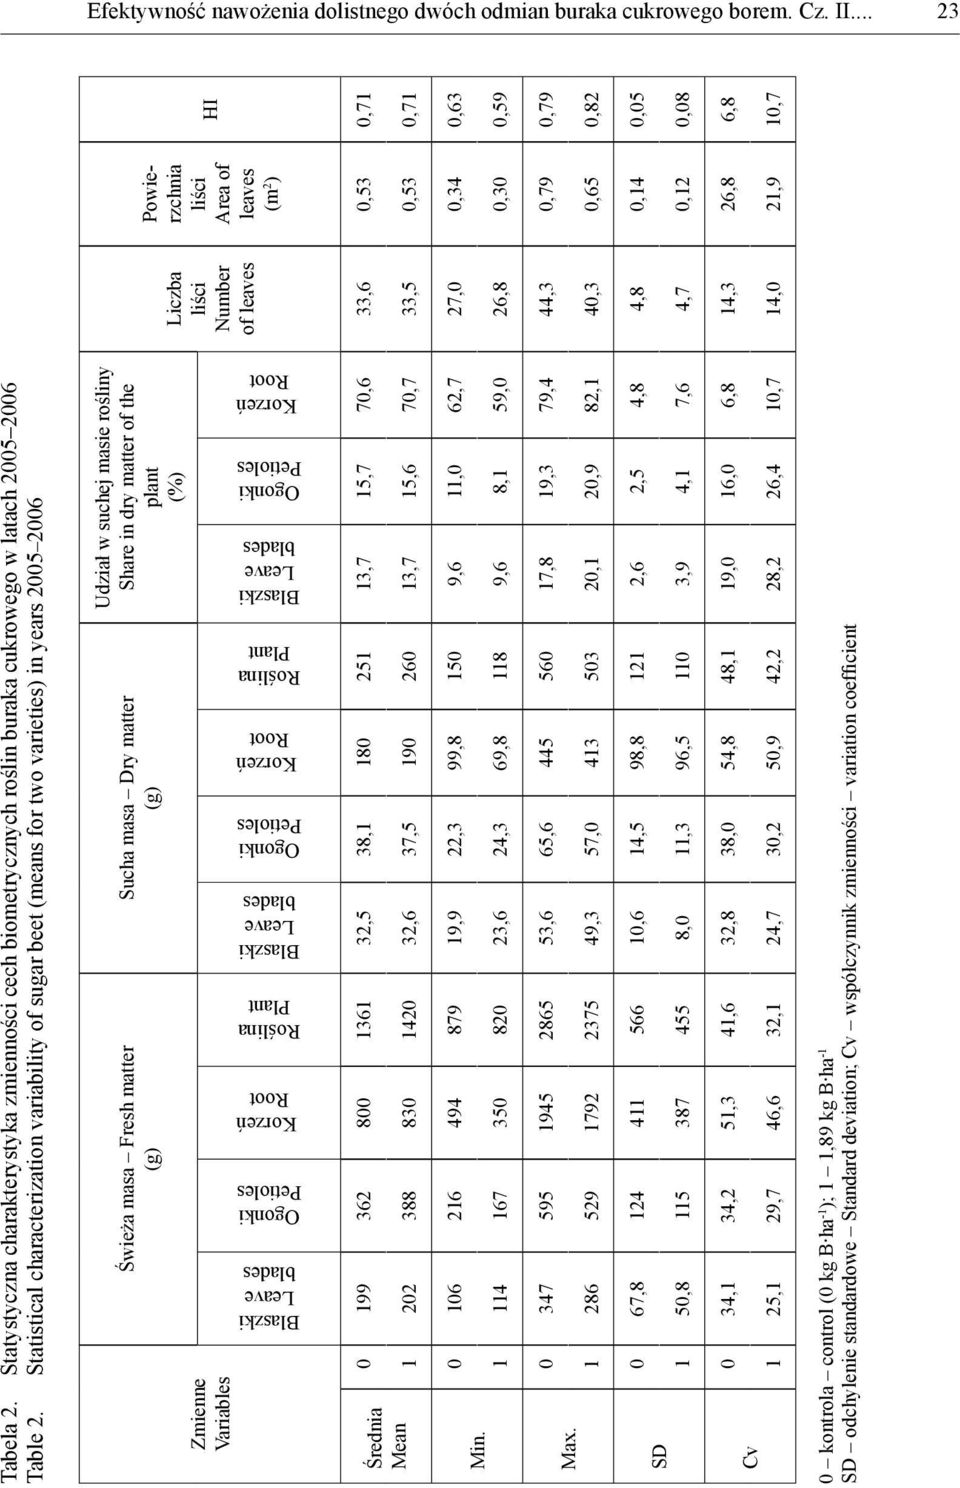 Statistical characterization variability of sugar beet (means for two varieties) in years 2005 2006 Zmienne Variables Świeża masa Fresh matter (g) Sucha masa Dry matter (g) Udział w suchej masie